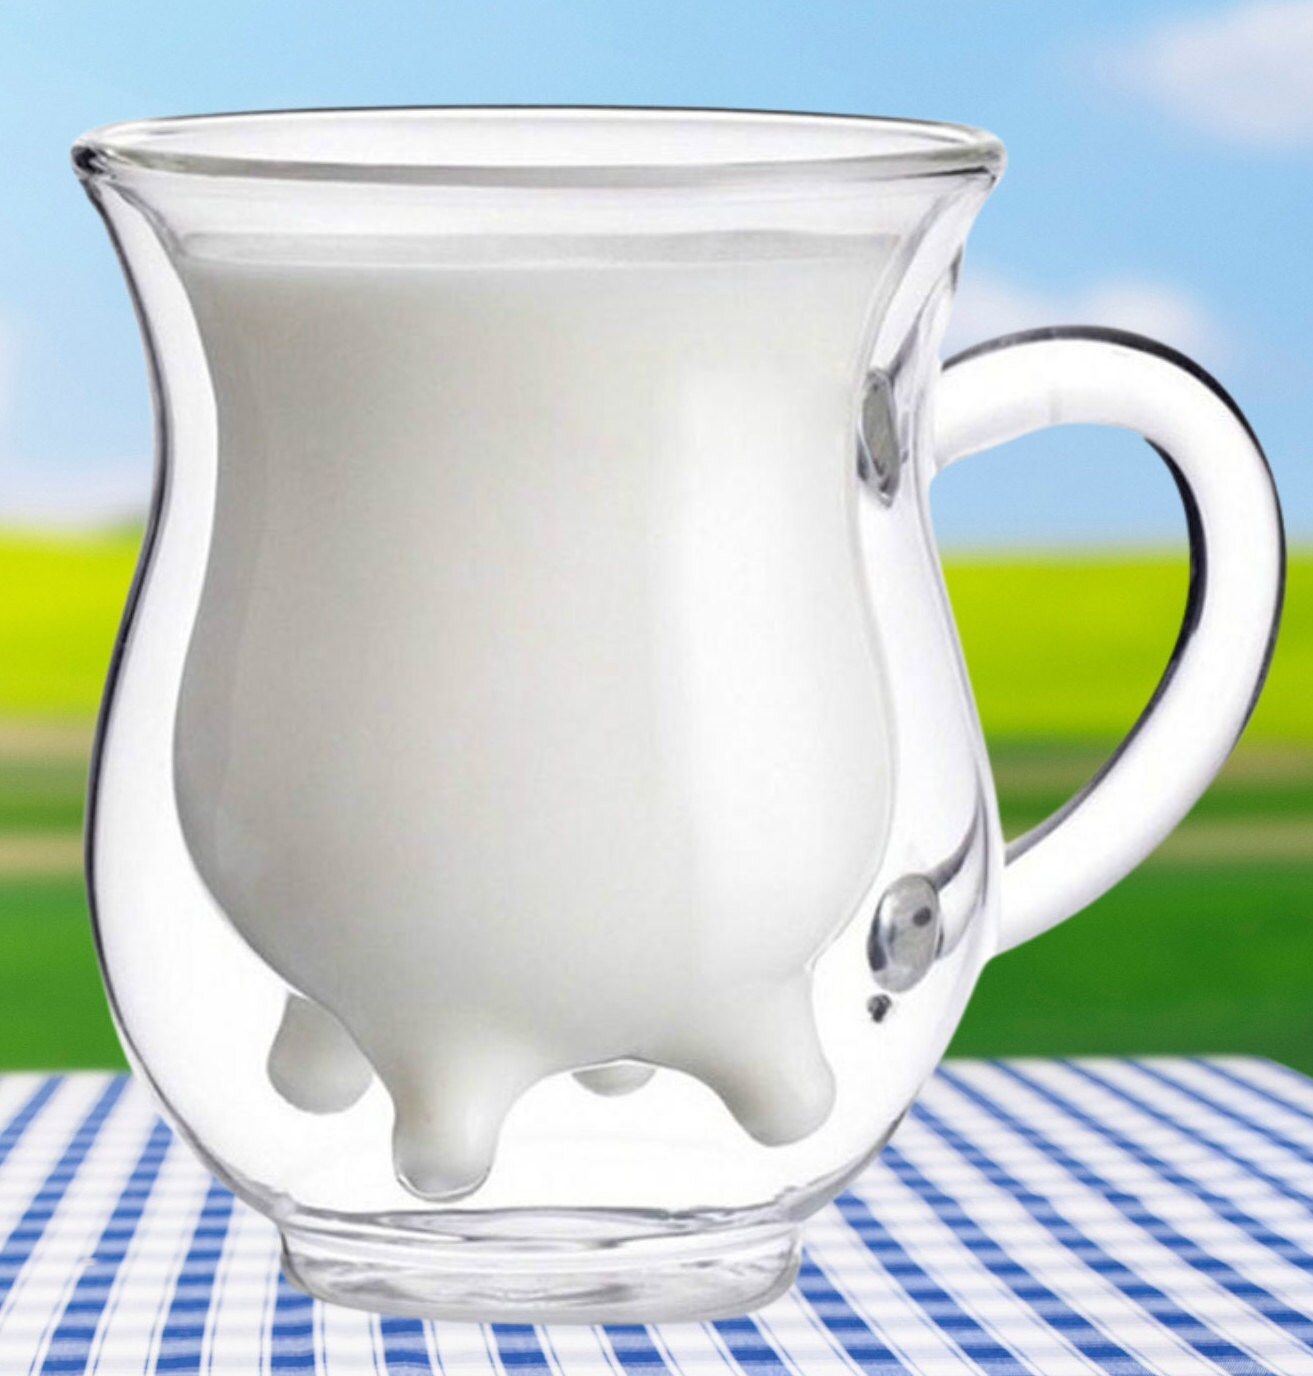 The Heifer Milk Pitcher, Designed To Look Like it Has Cow Udders